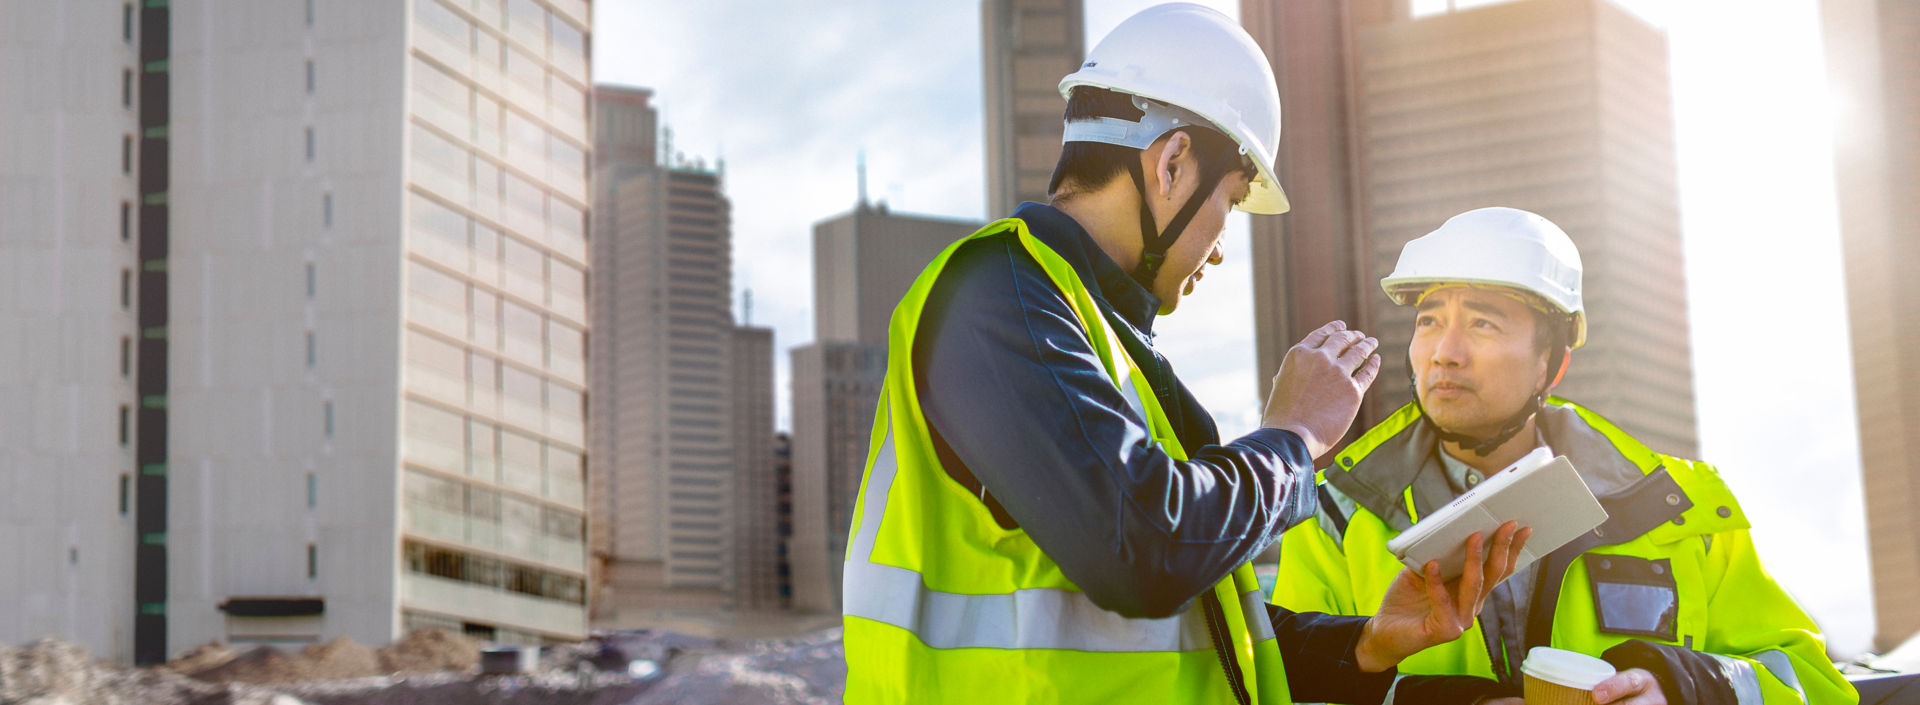 Two men in hi-vis jackets have a conversation on a building site while looking at a tablet.